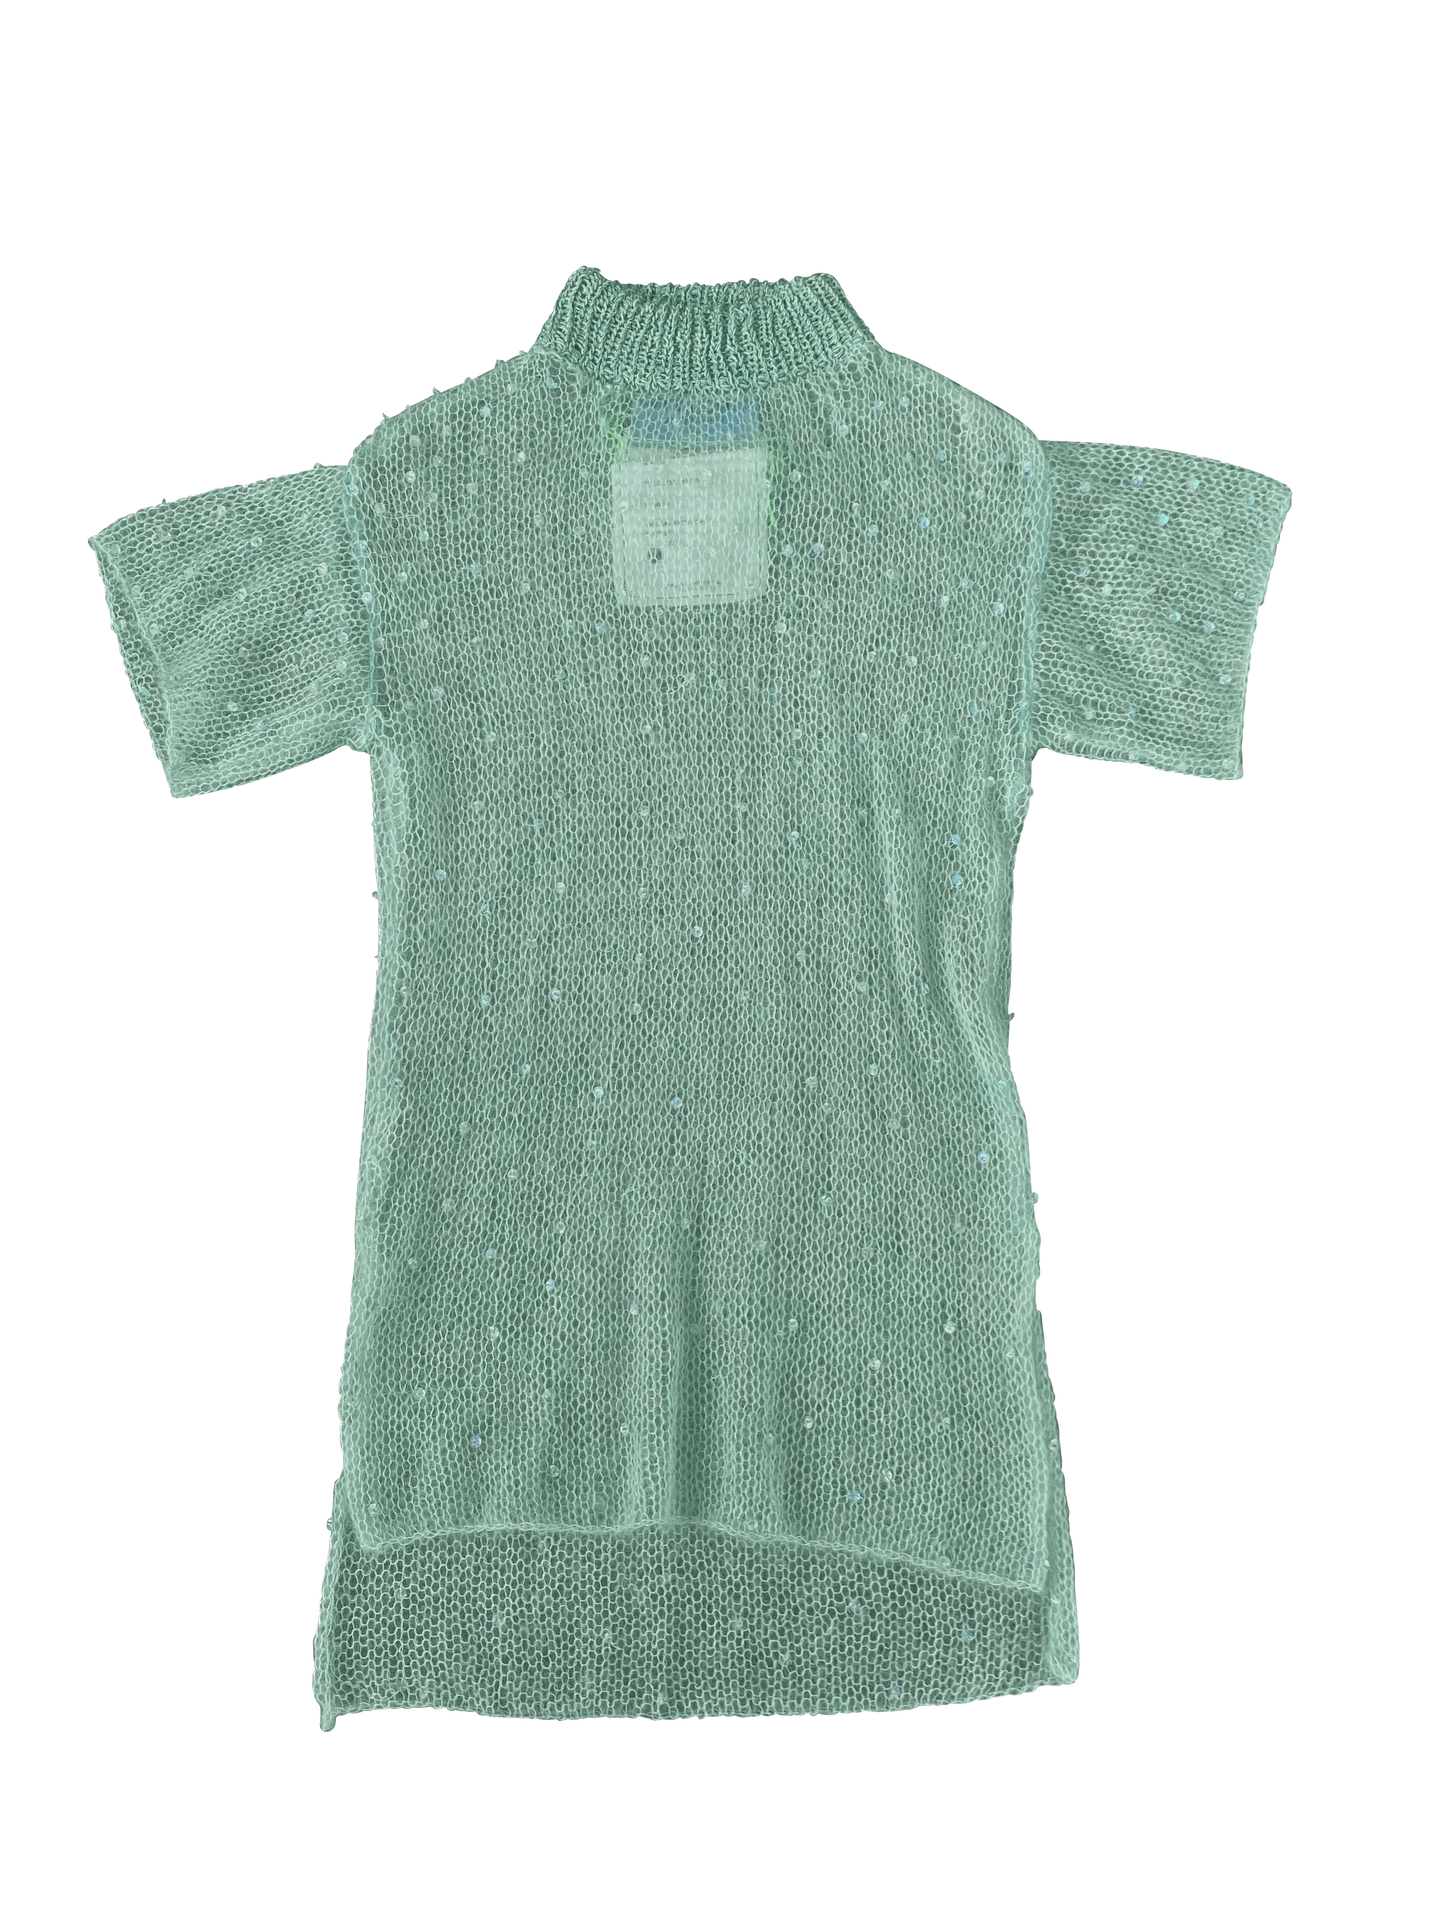 Sky Artisanal Mohair T-shirt with Hand-beaded Sequins Details